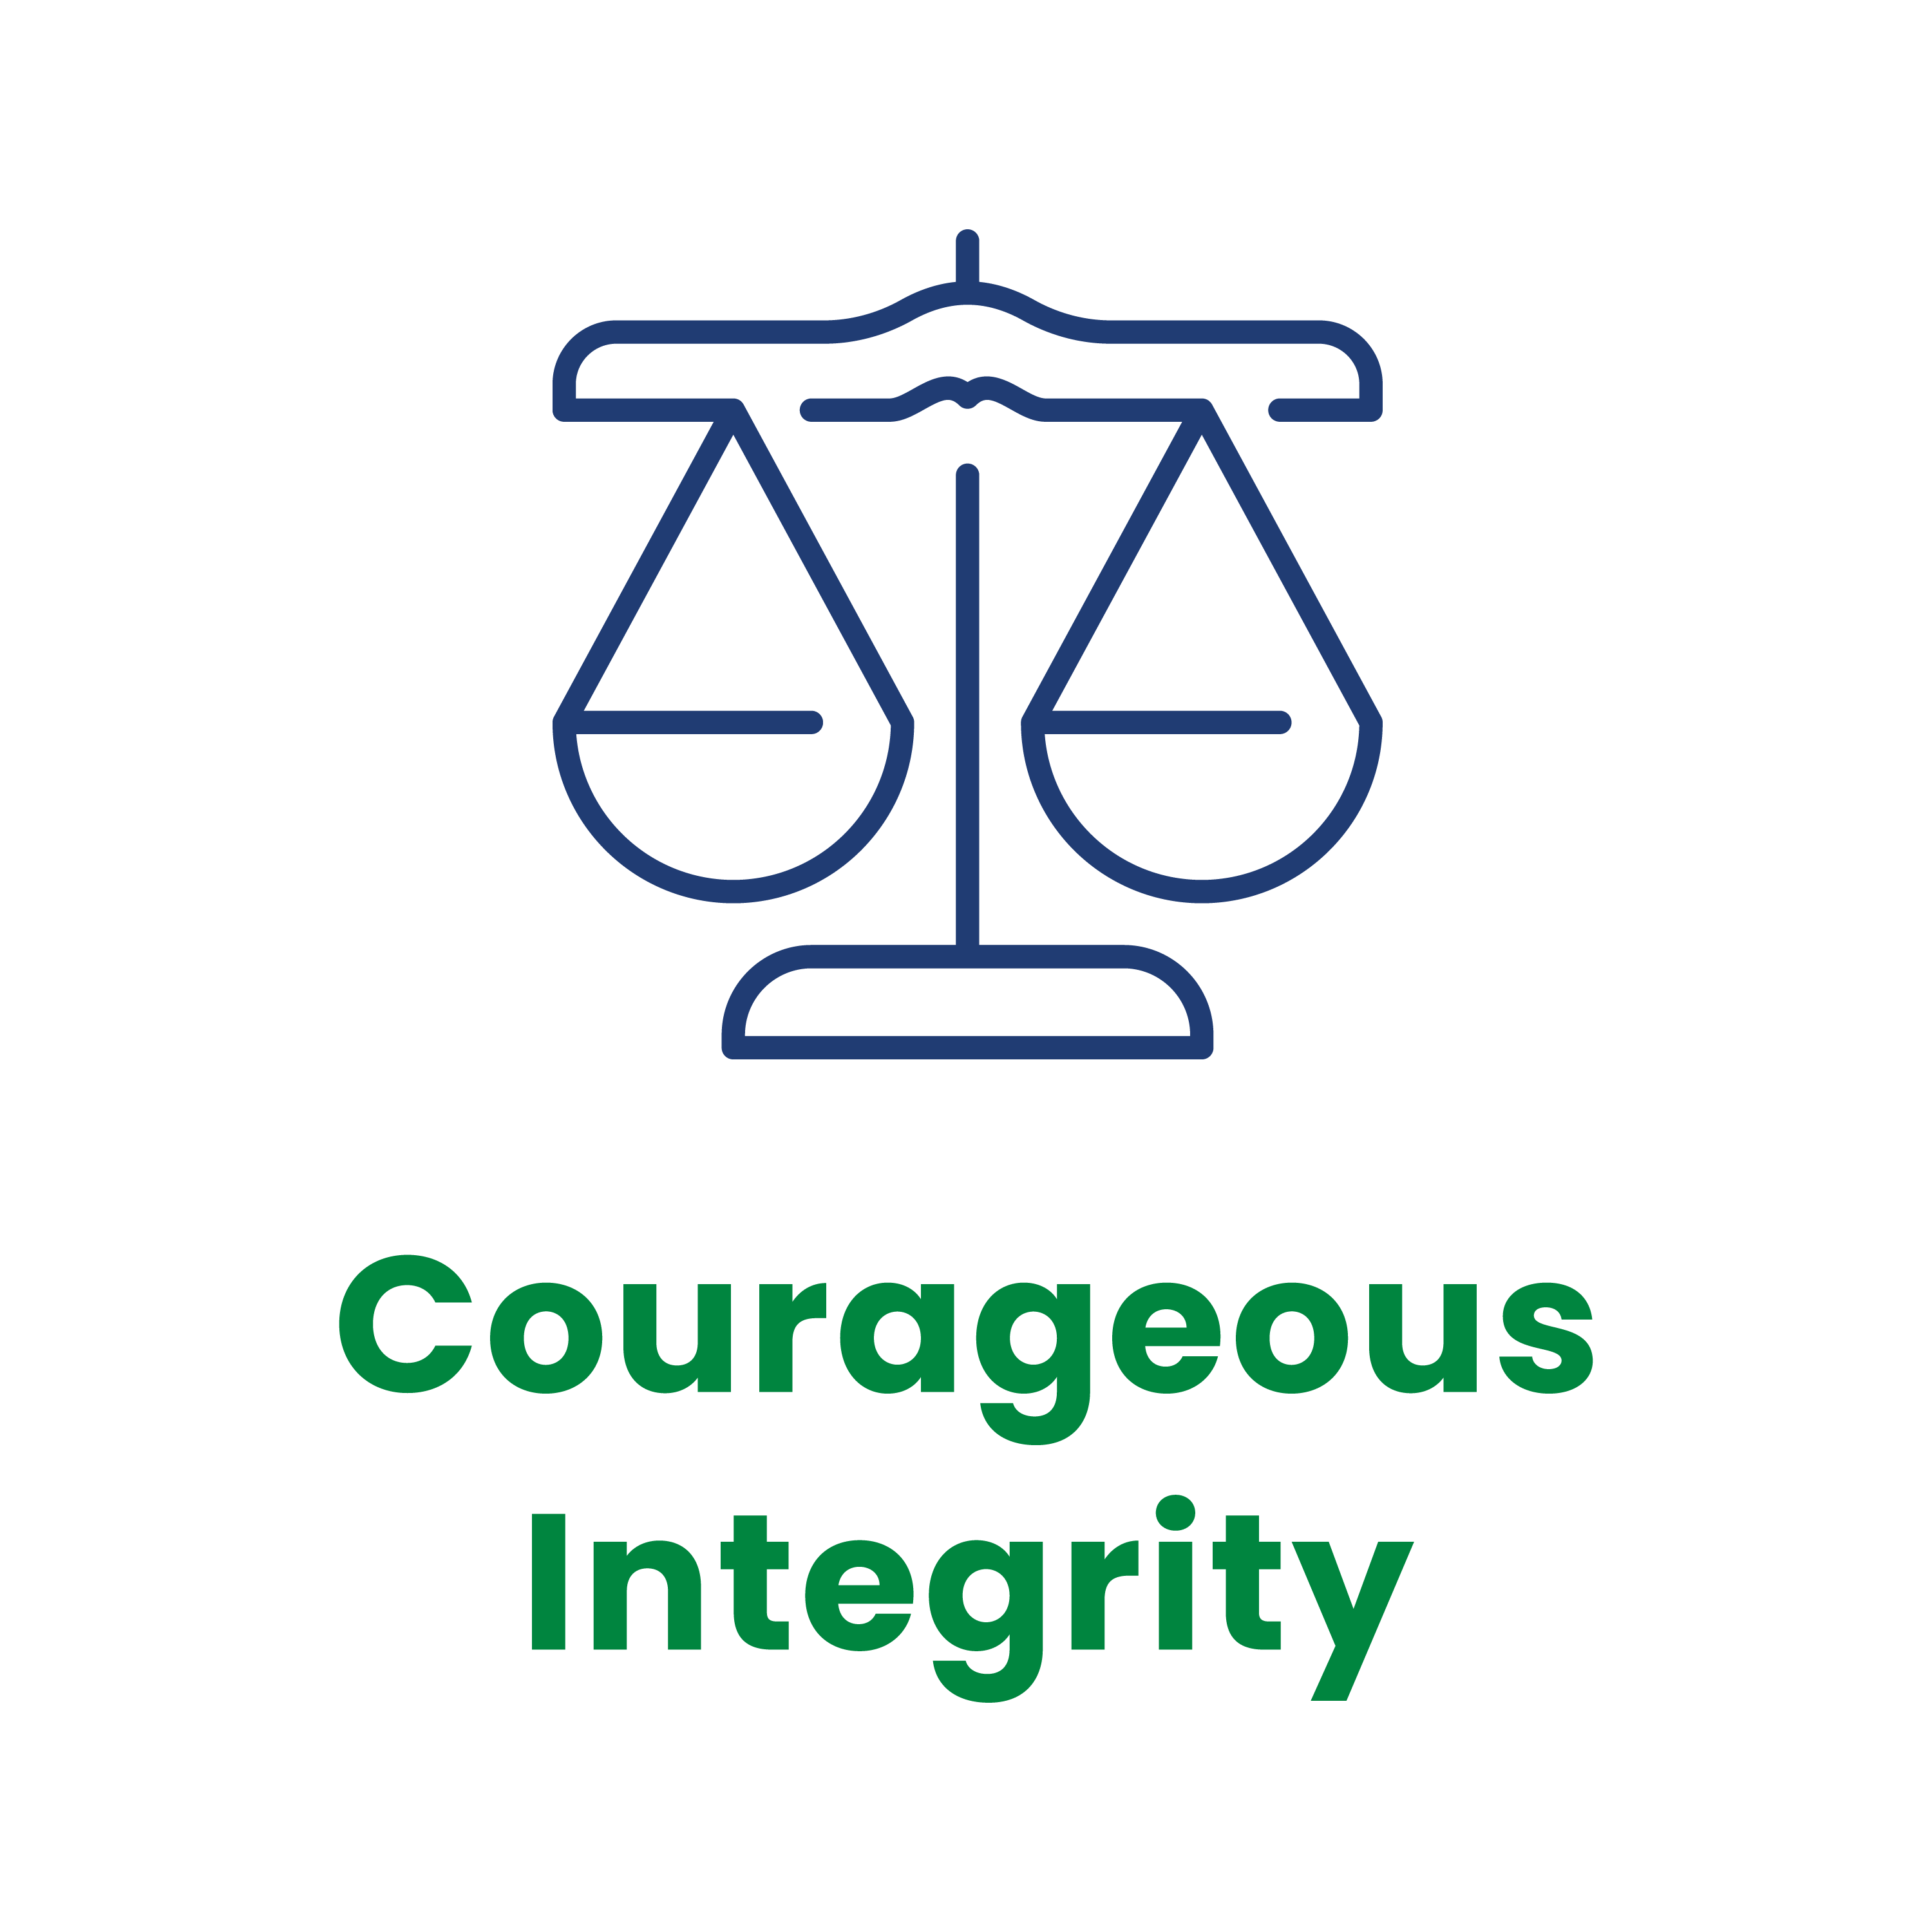 Scale with "Couragous Integrity" underneath